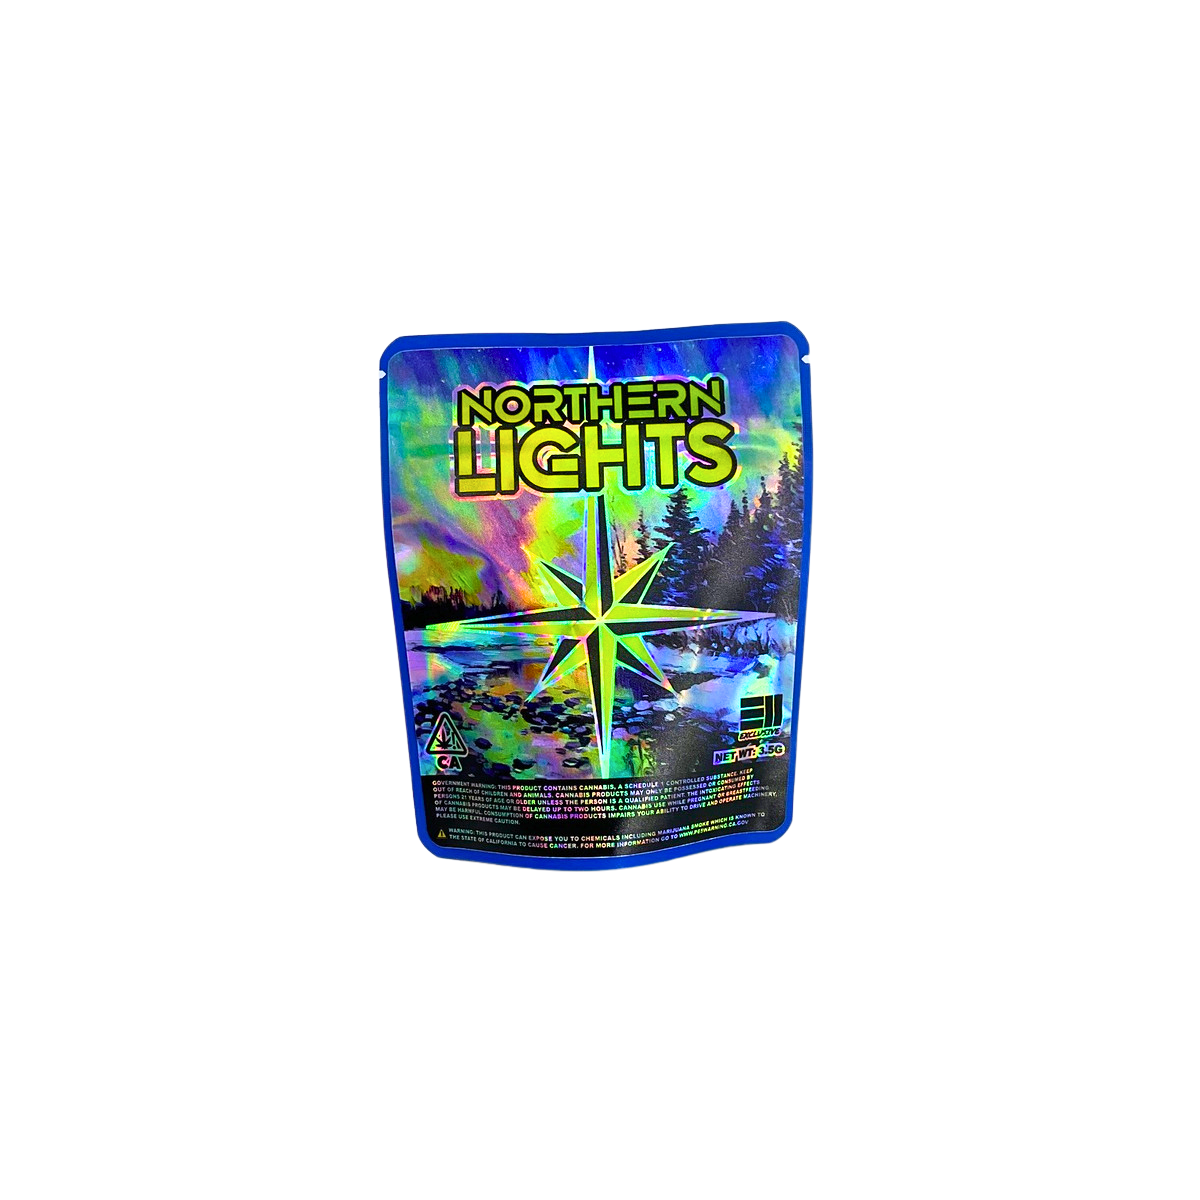 Northern Lights Holographic Stickered Mylar Bags